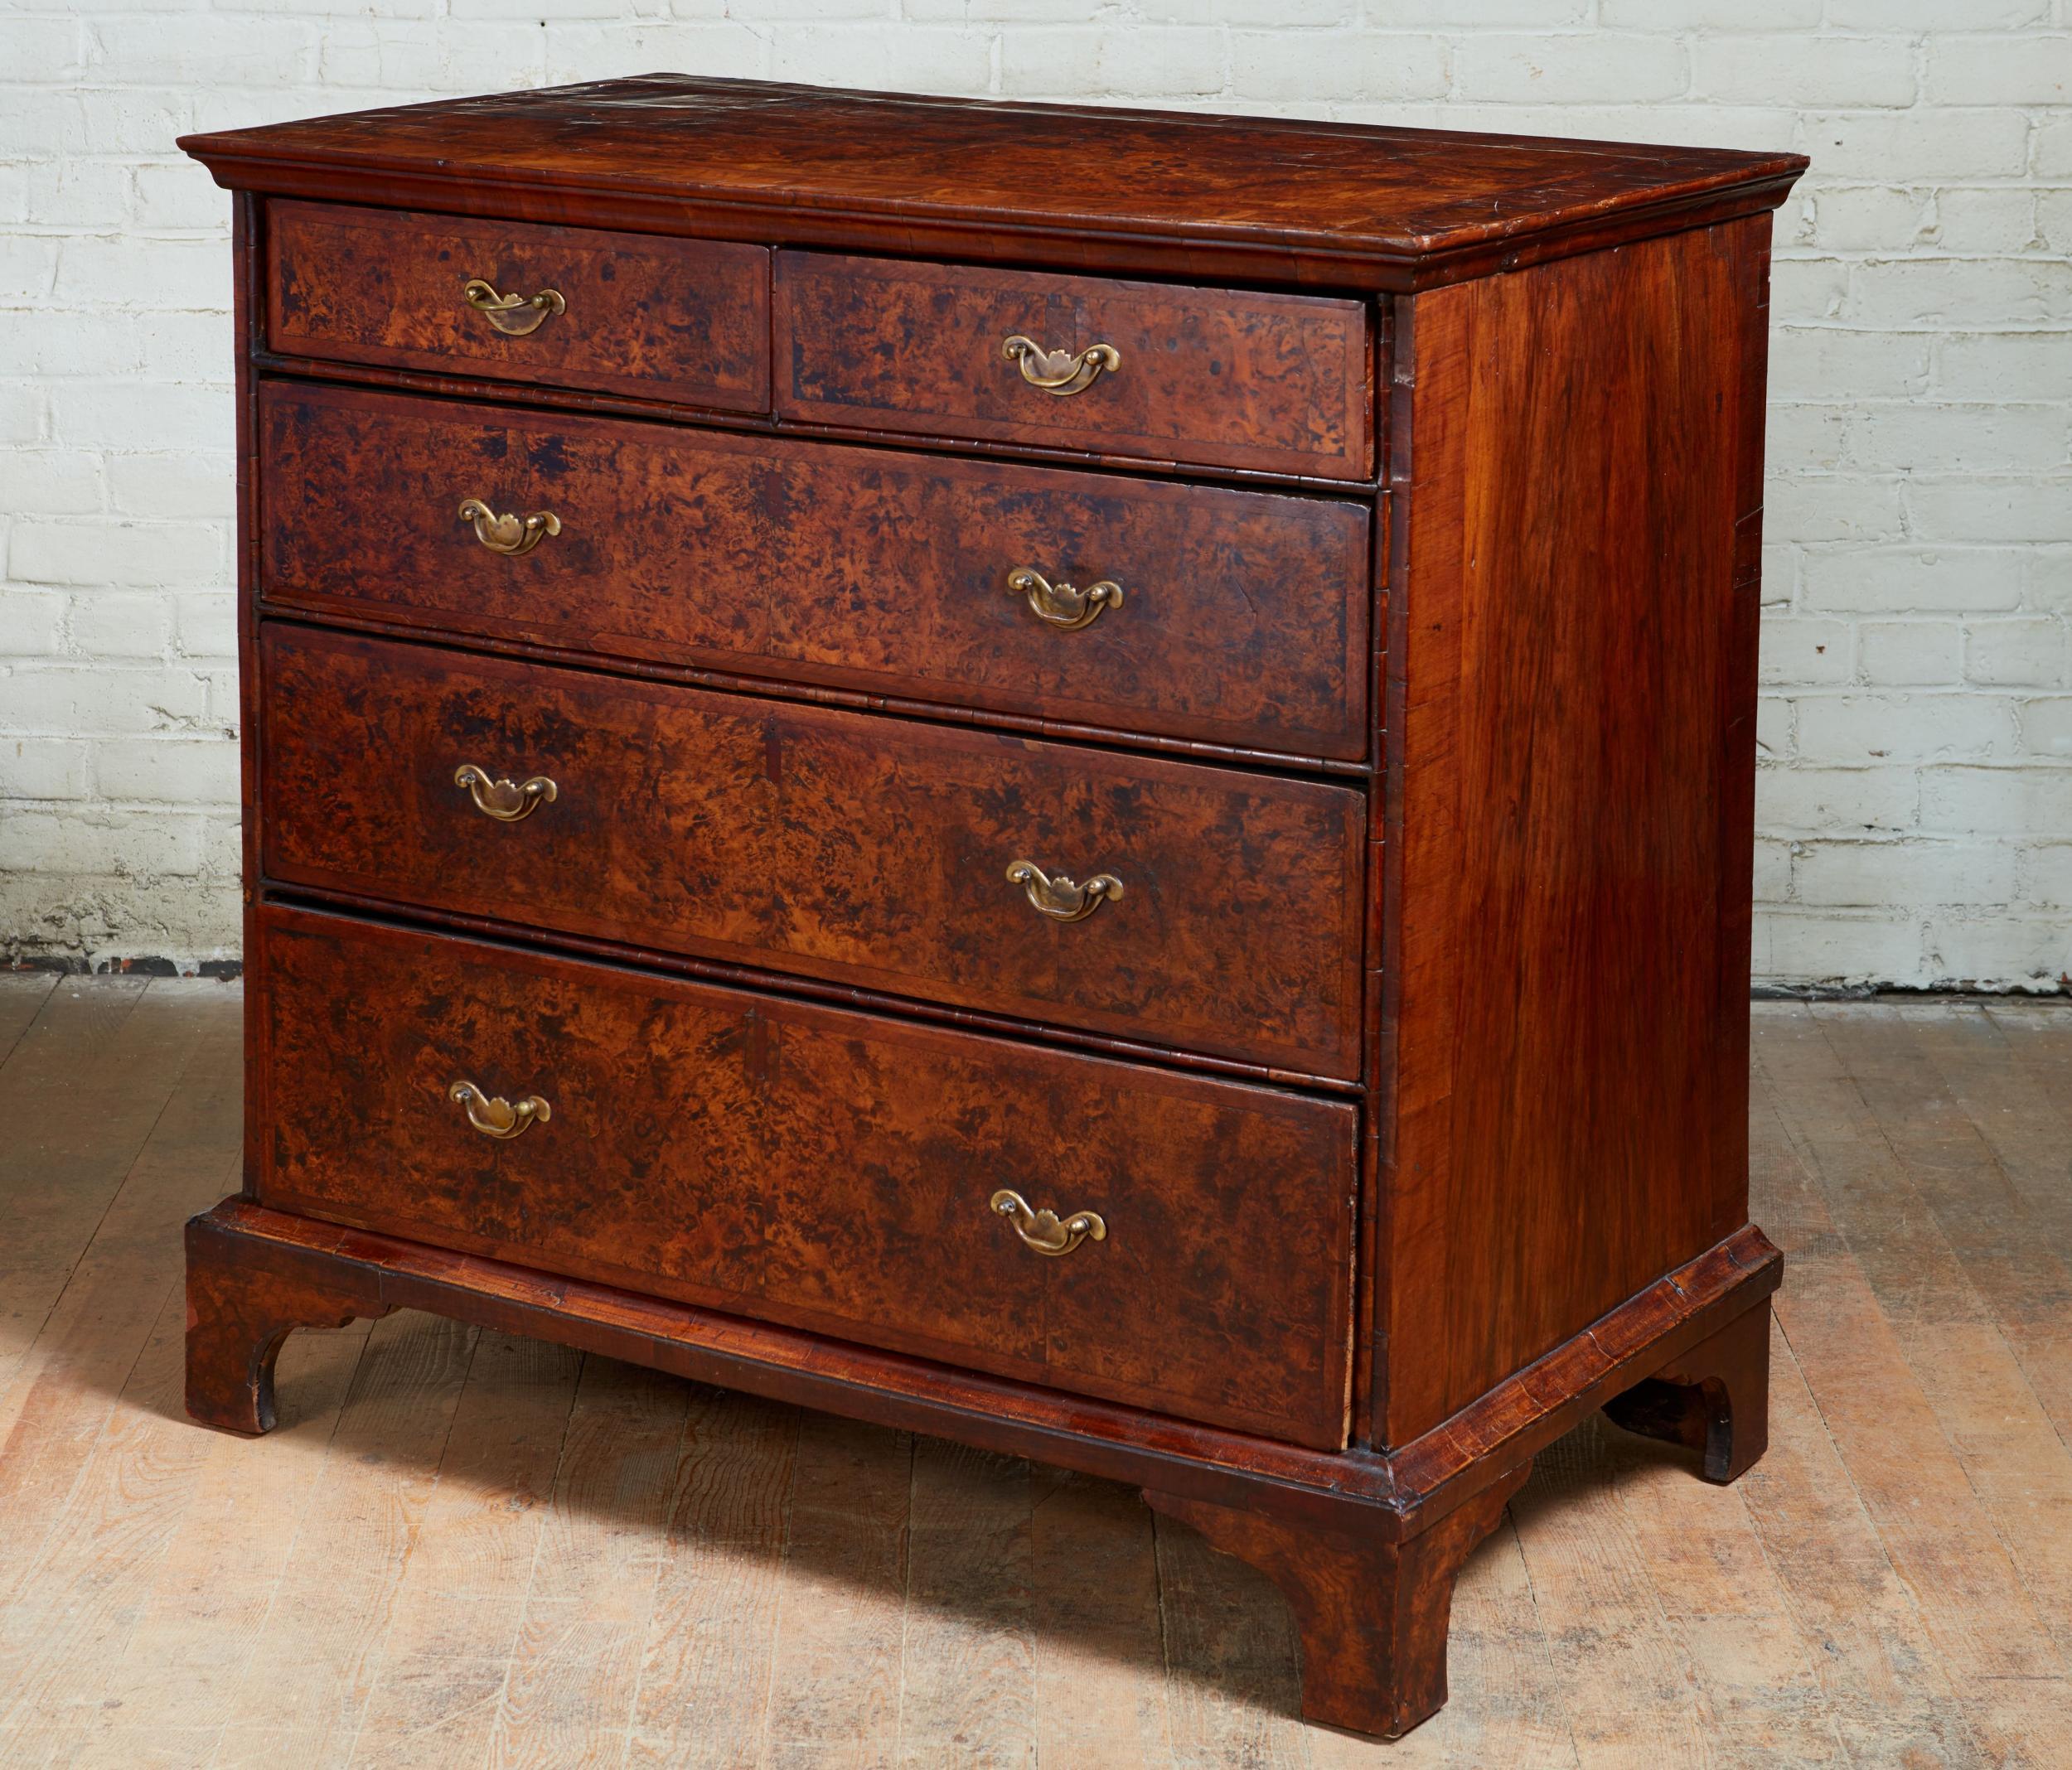 Fine early 18th century English chest of drawers veneered in nicely figured 